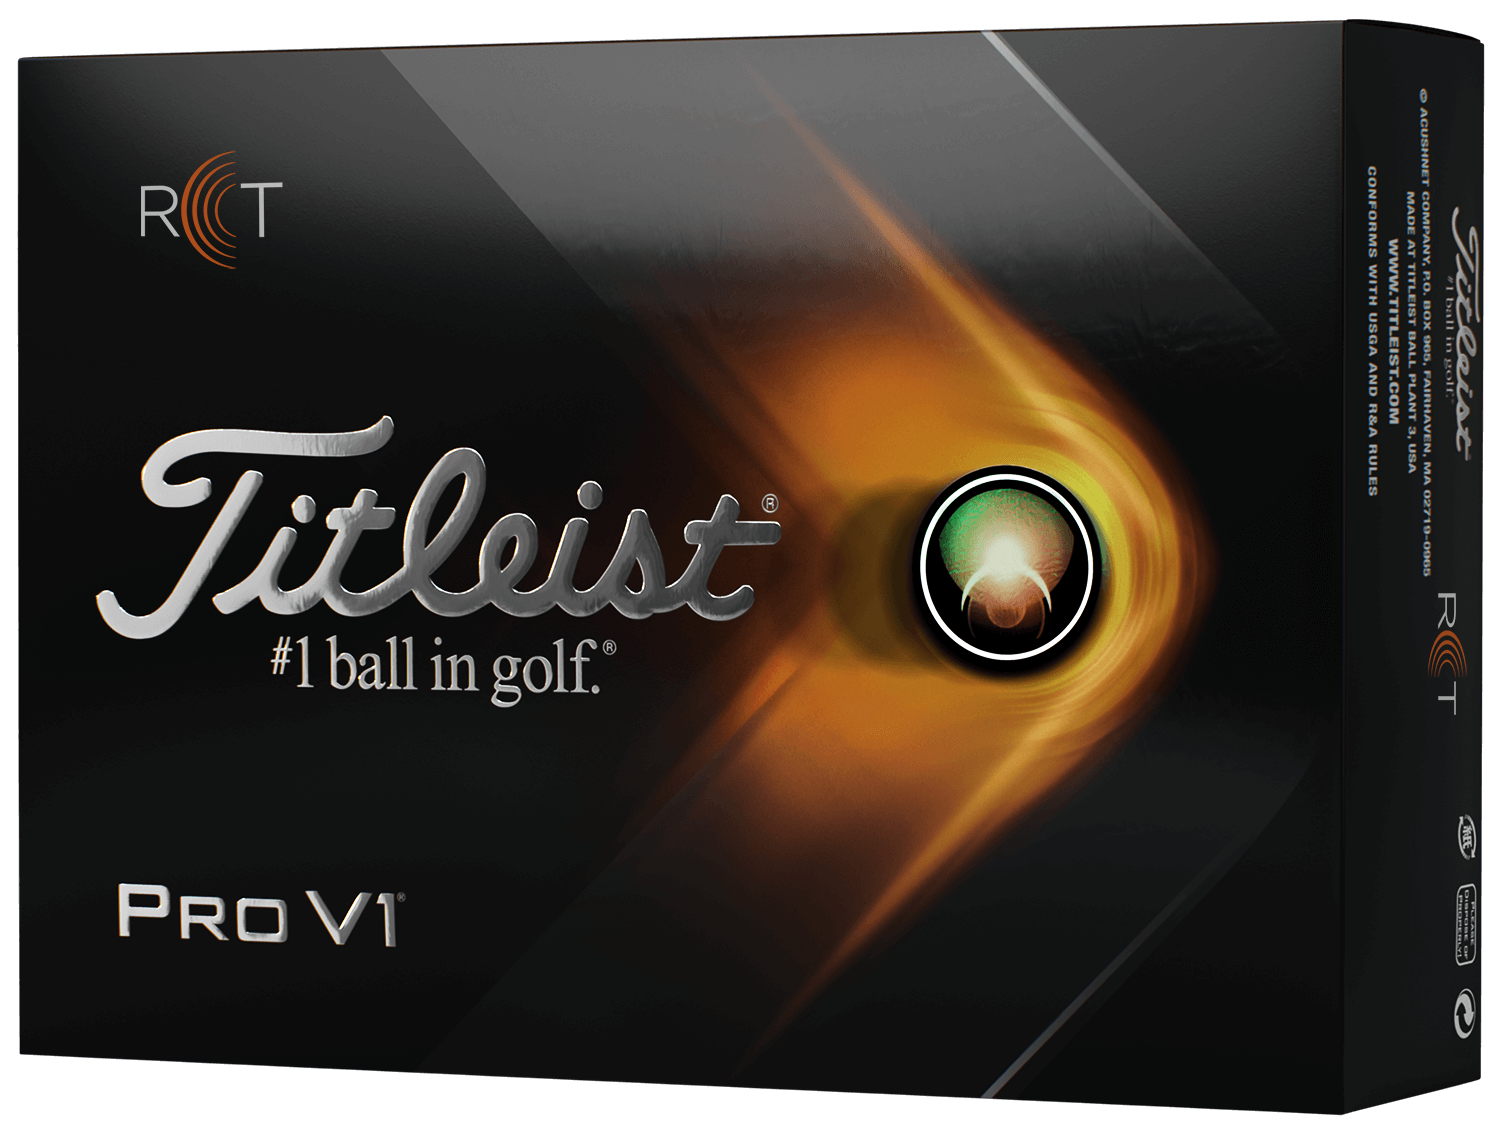 trackman_virtual_league_presented_by_titleist_rtc